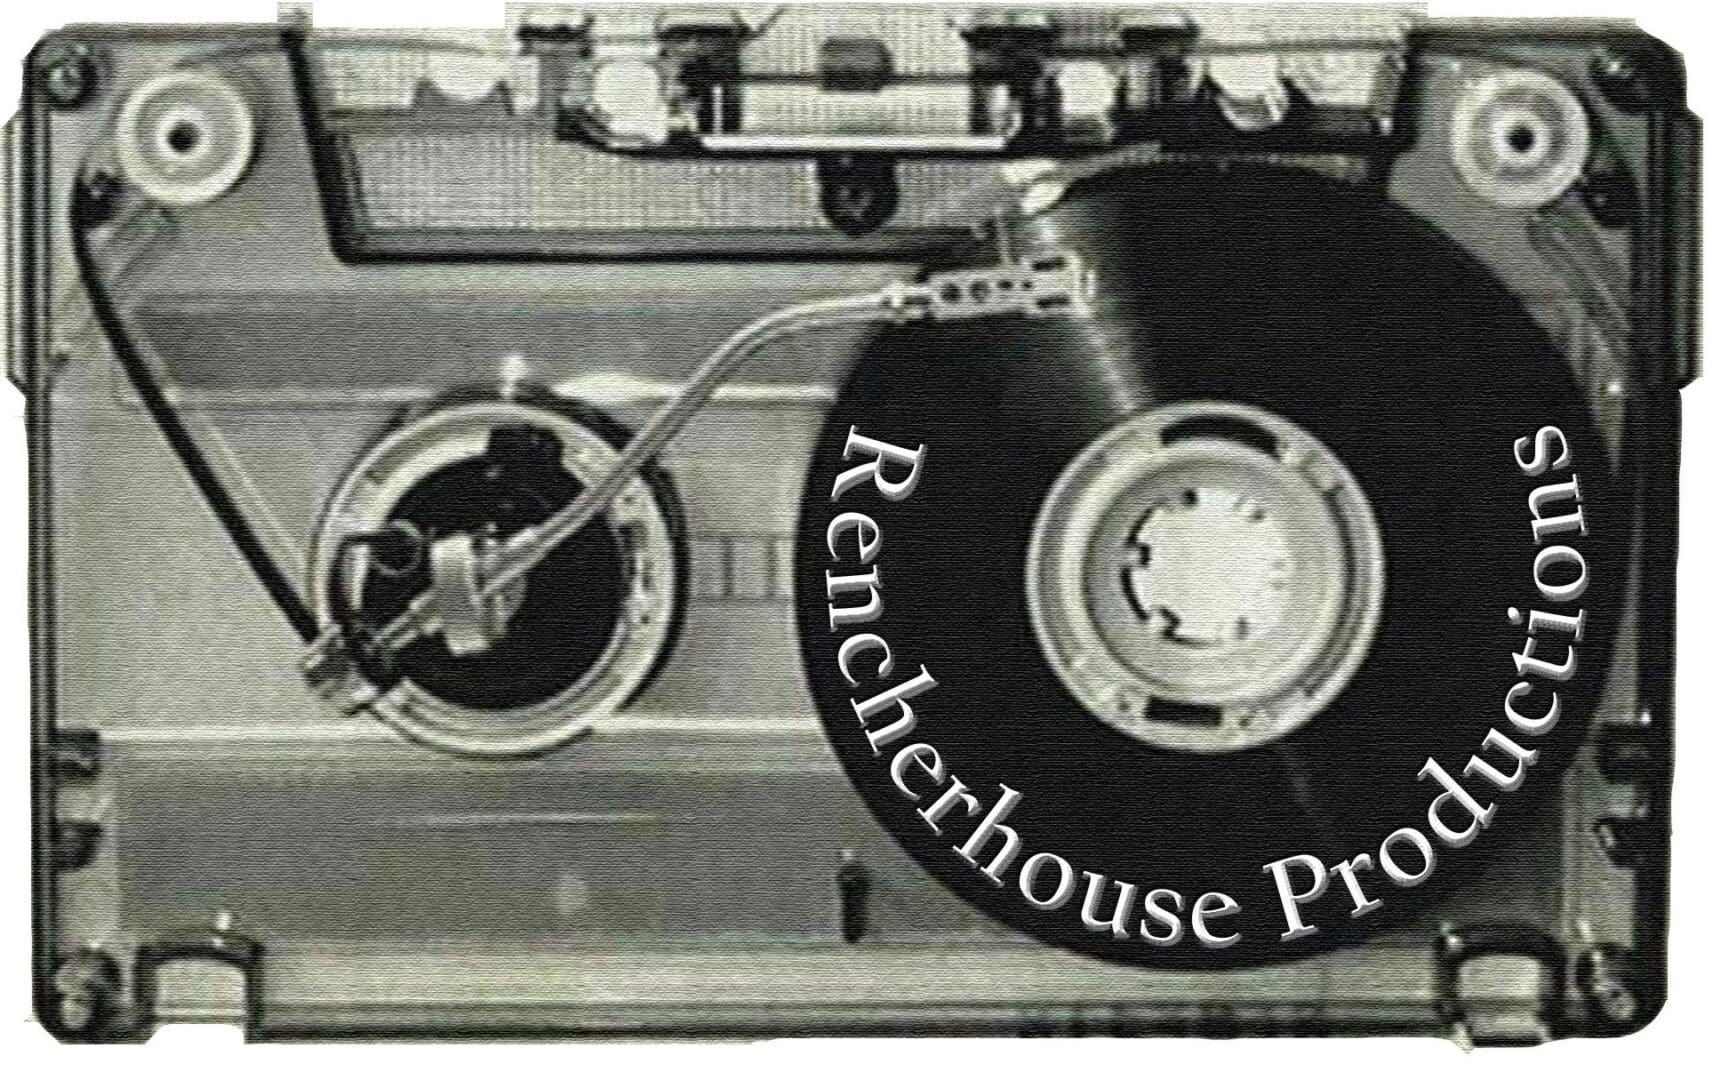 A cassette recorder with the words'reachhouse productions' on it.